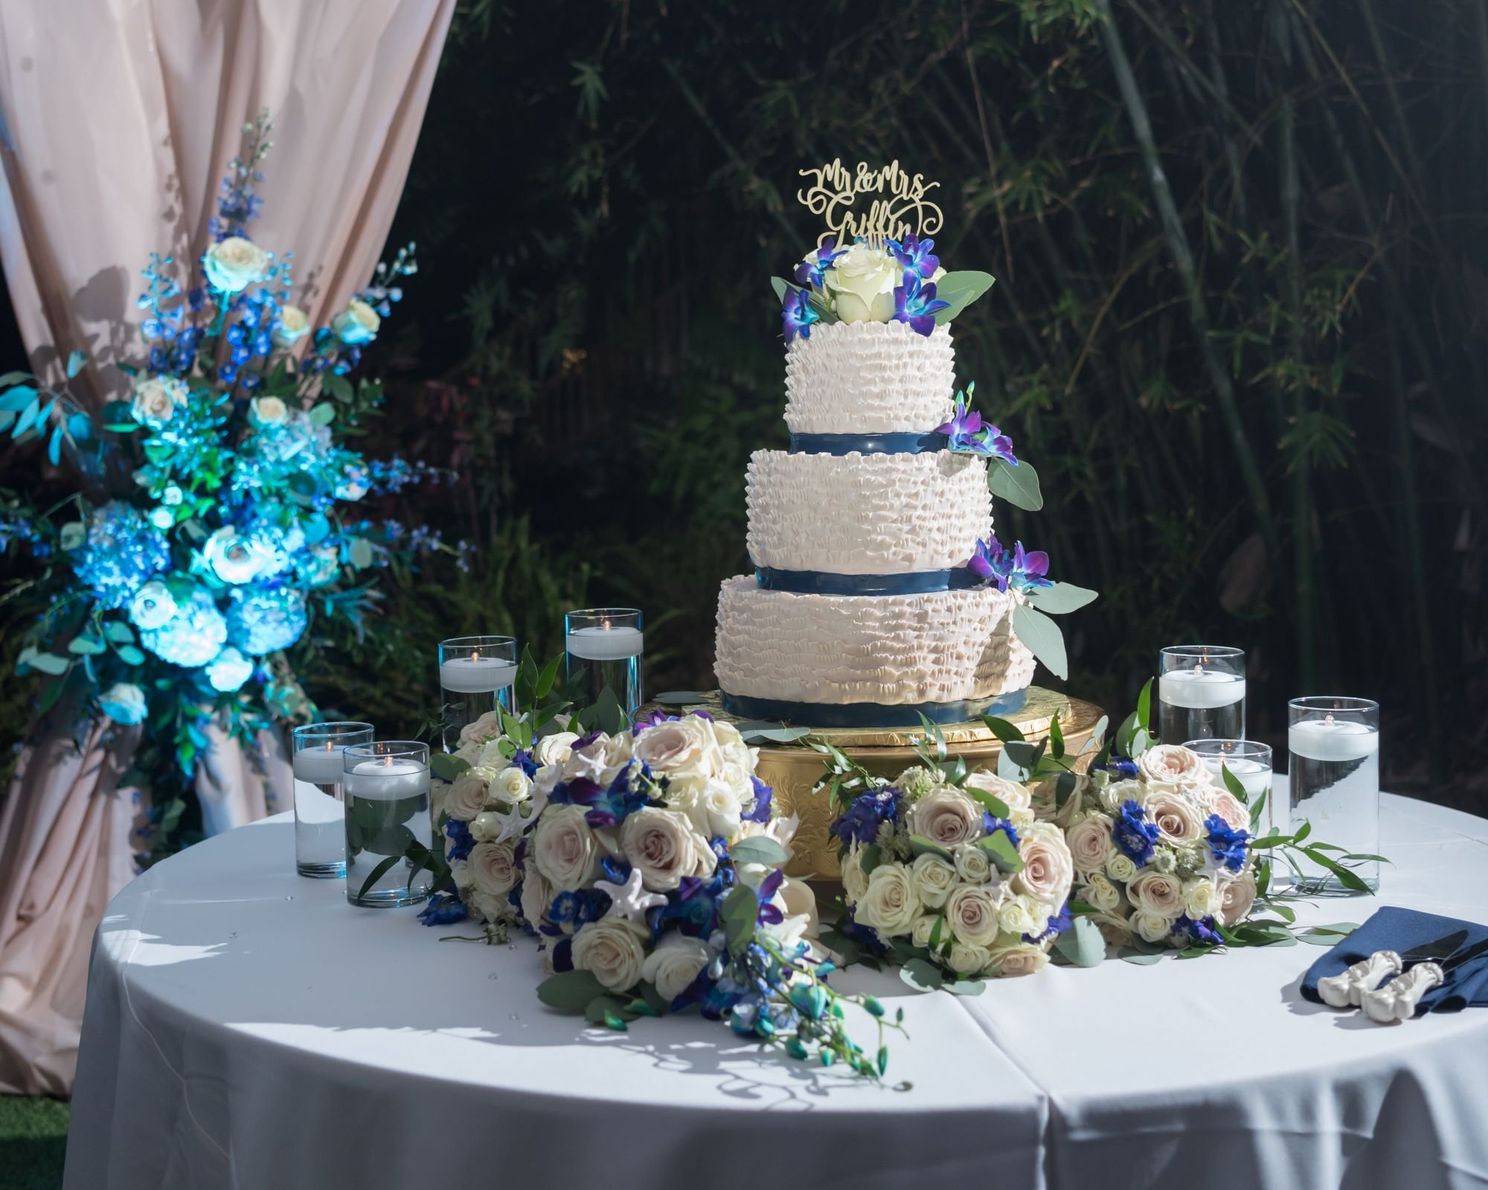 four-tiere white wedding cake with purple details on table surrounded by flower bouquets.